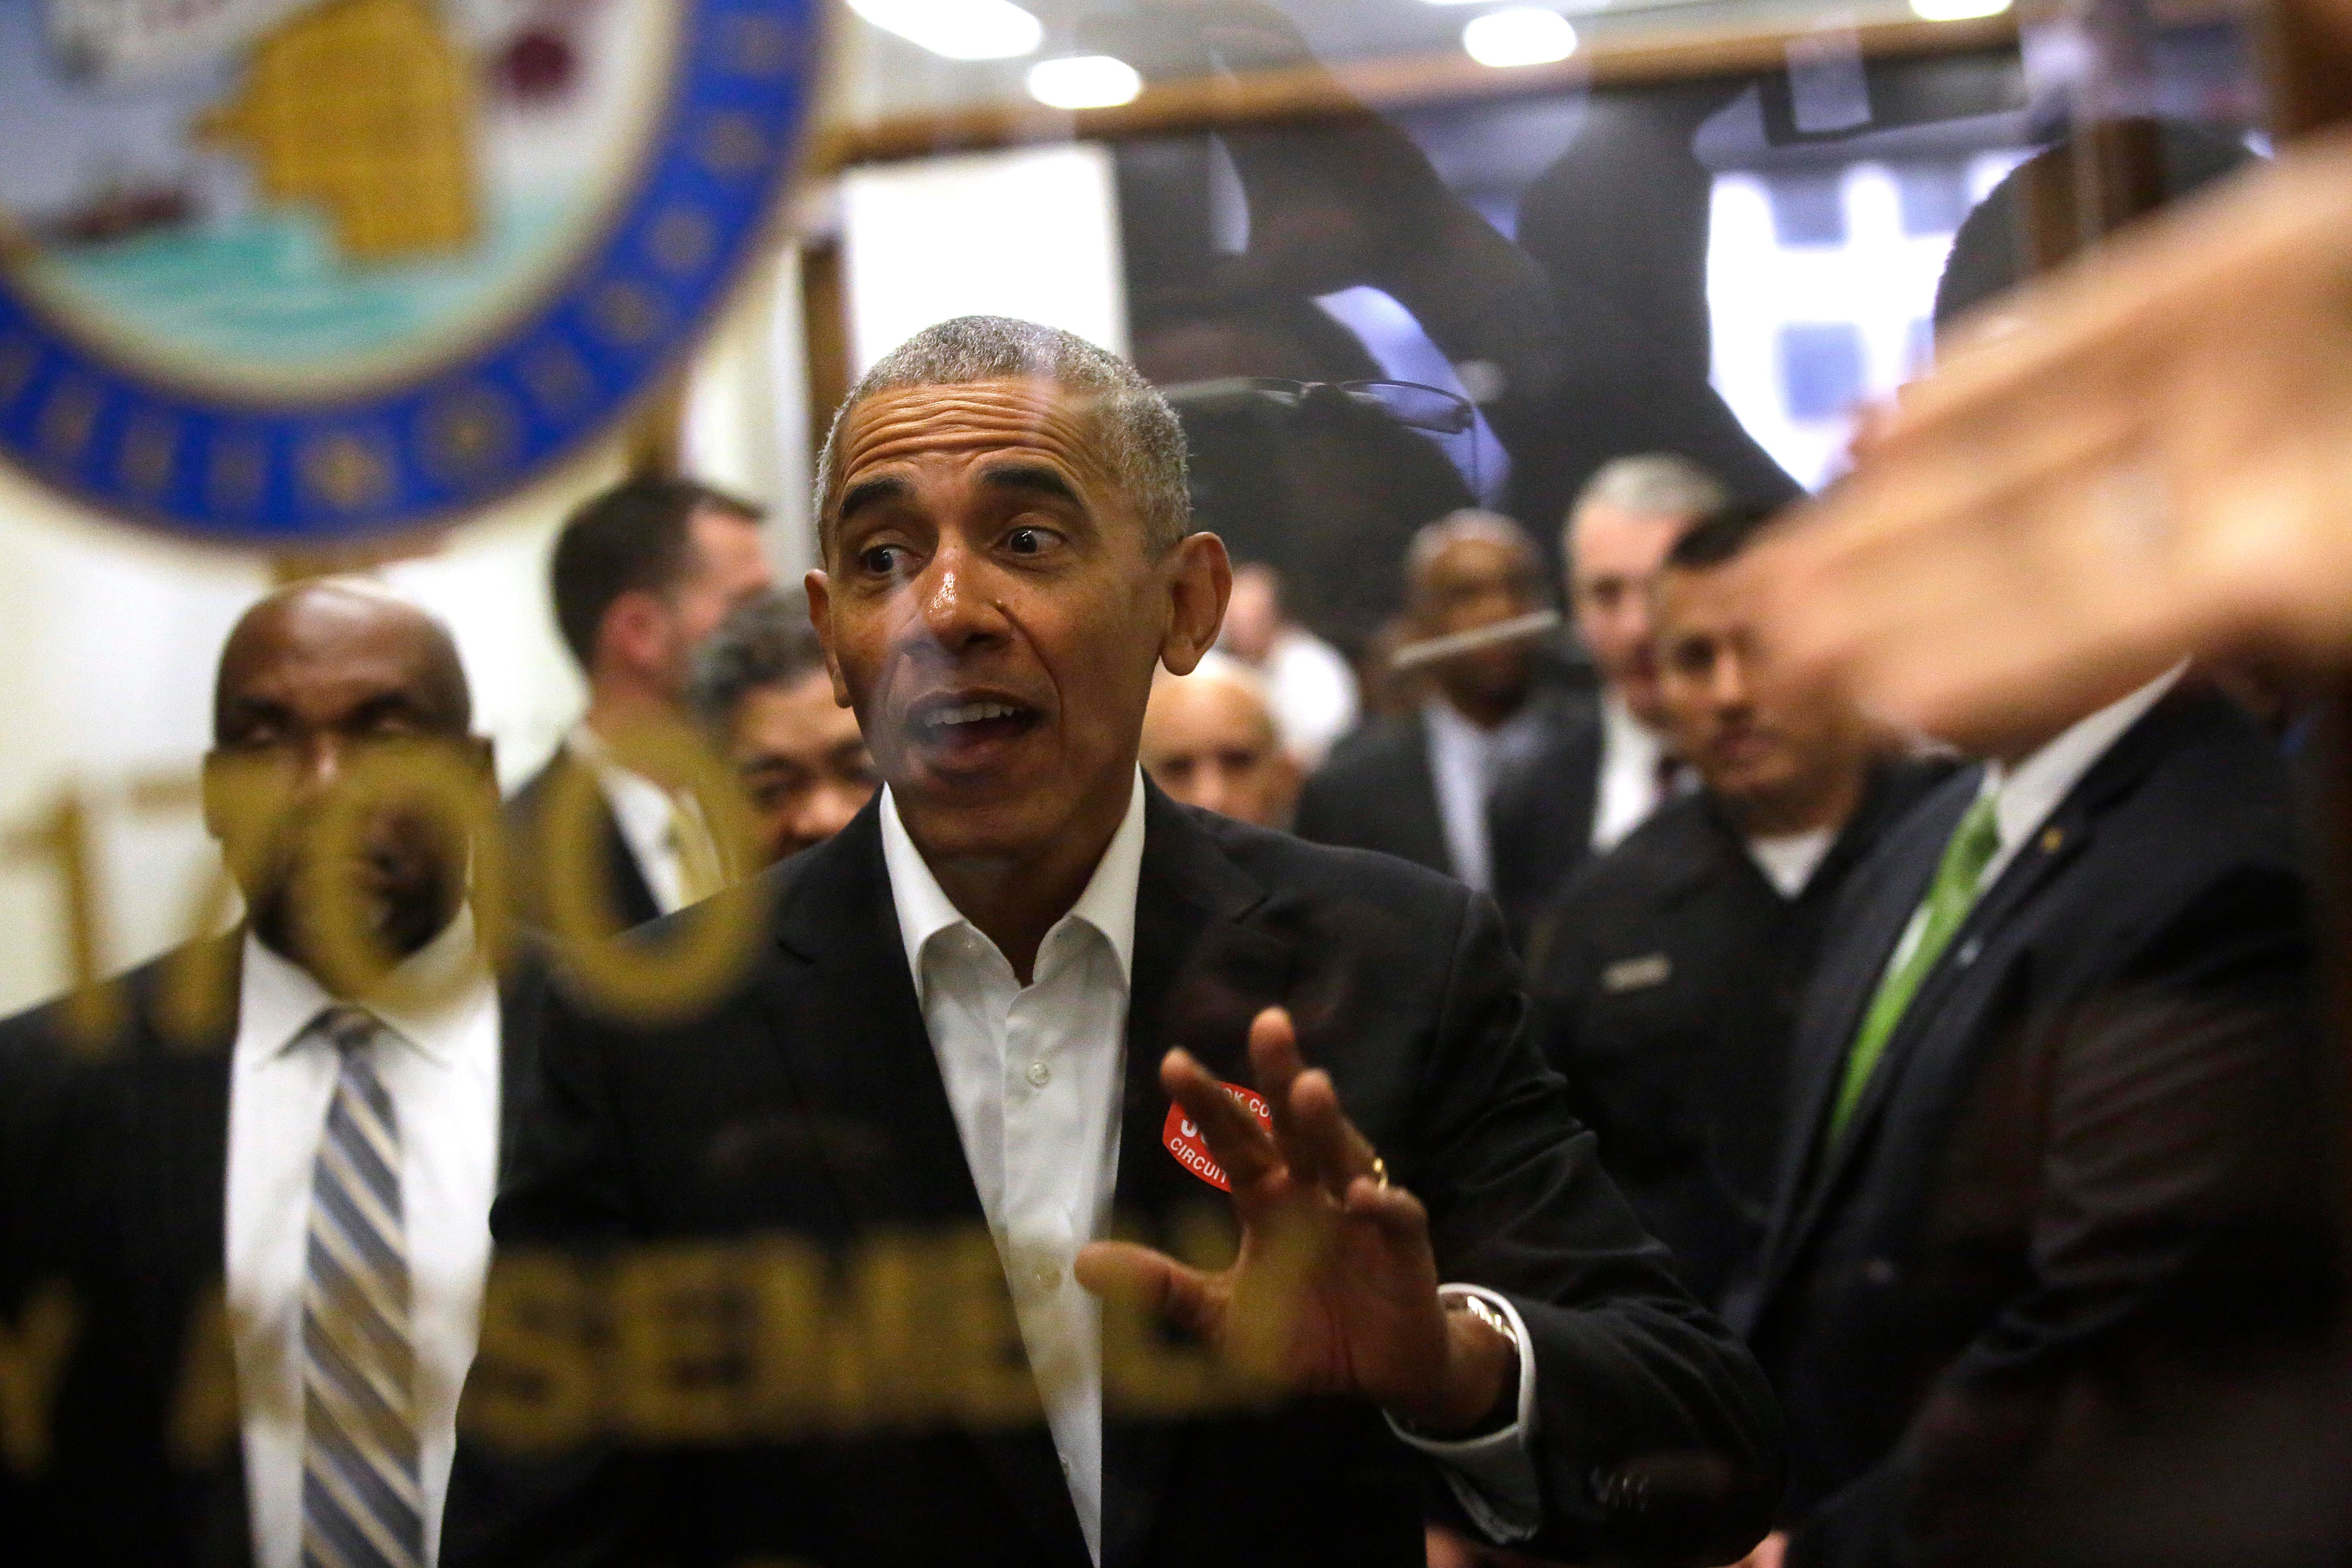 The Quick Read: Average Joe And Former President Barack Obama Reports For Jury Duty 
